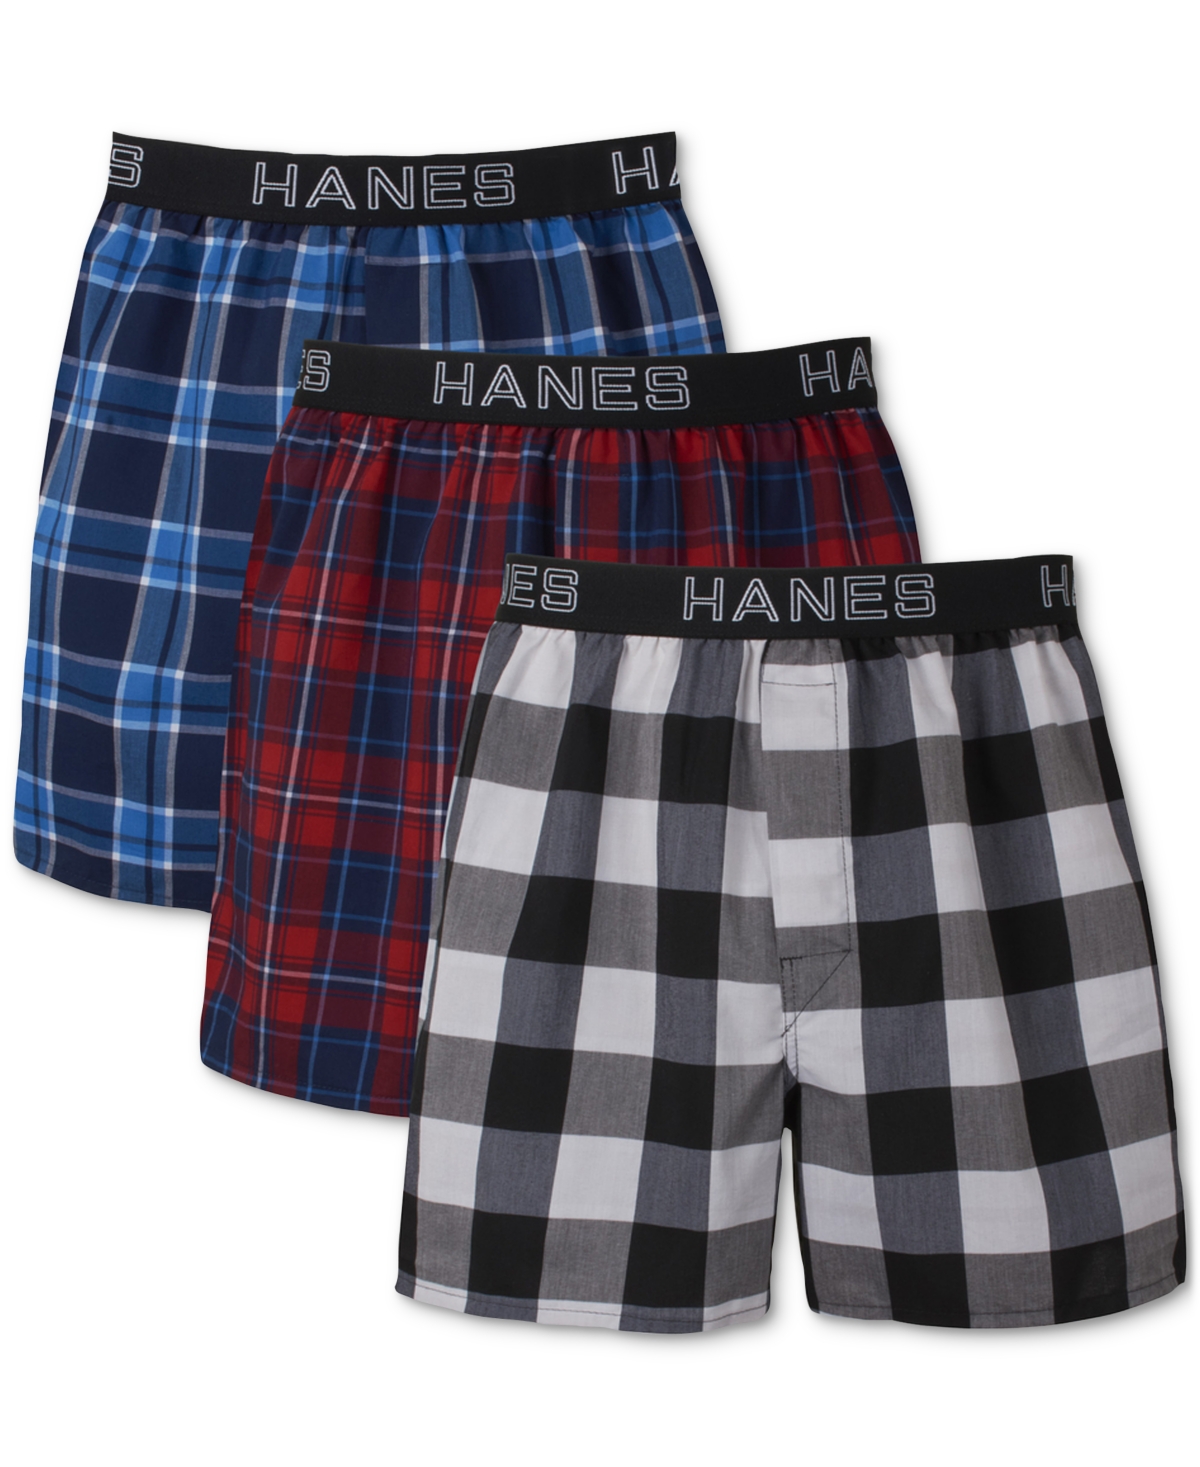 Hanes Men's 3-pk. Ultimate Comfort Flex Fit Stretch Woven Boxers In Assorted